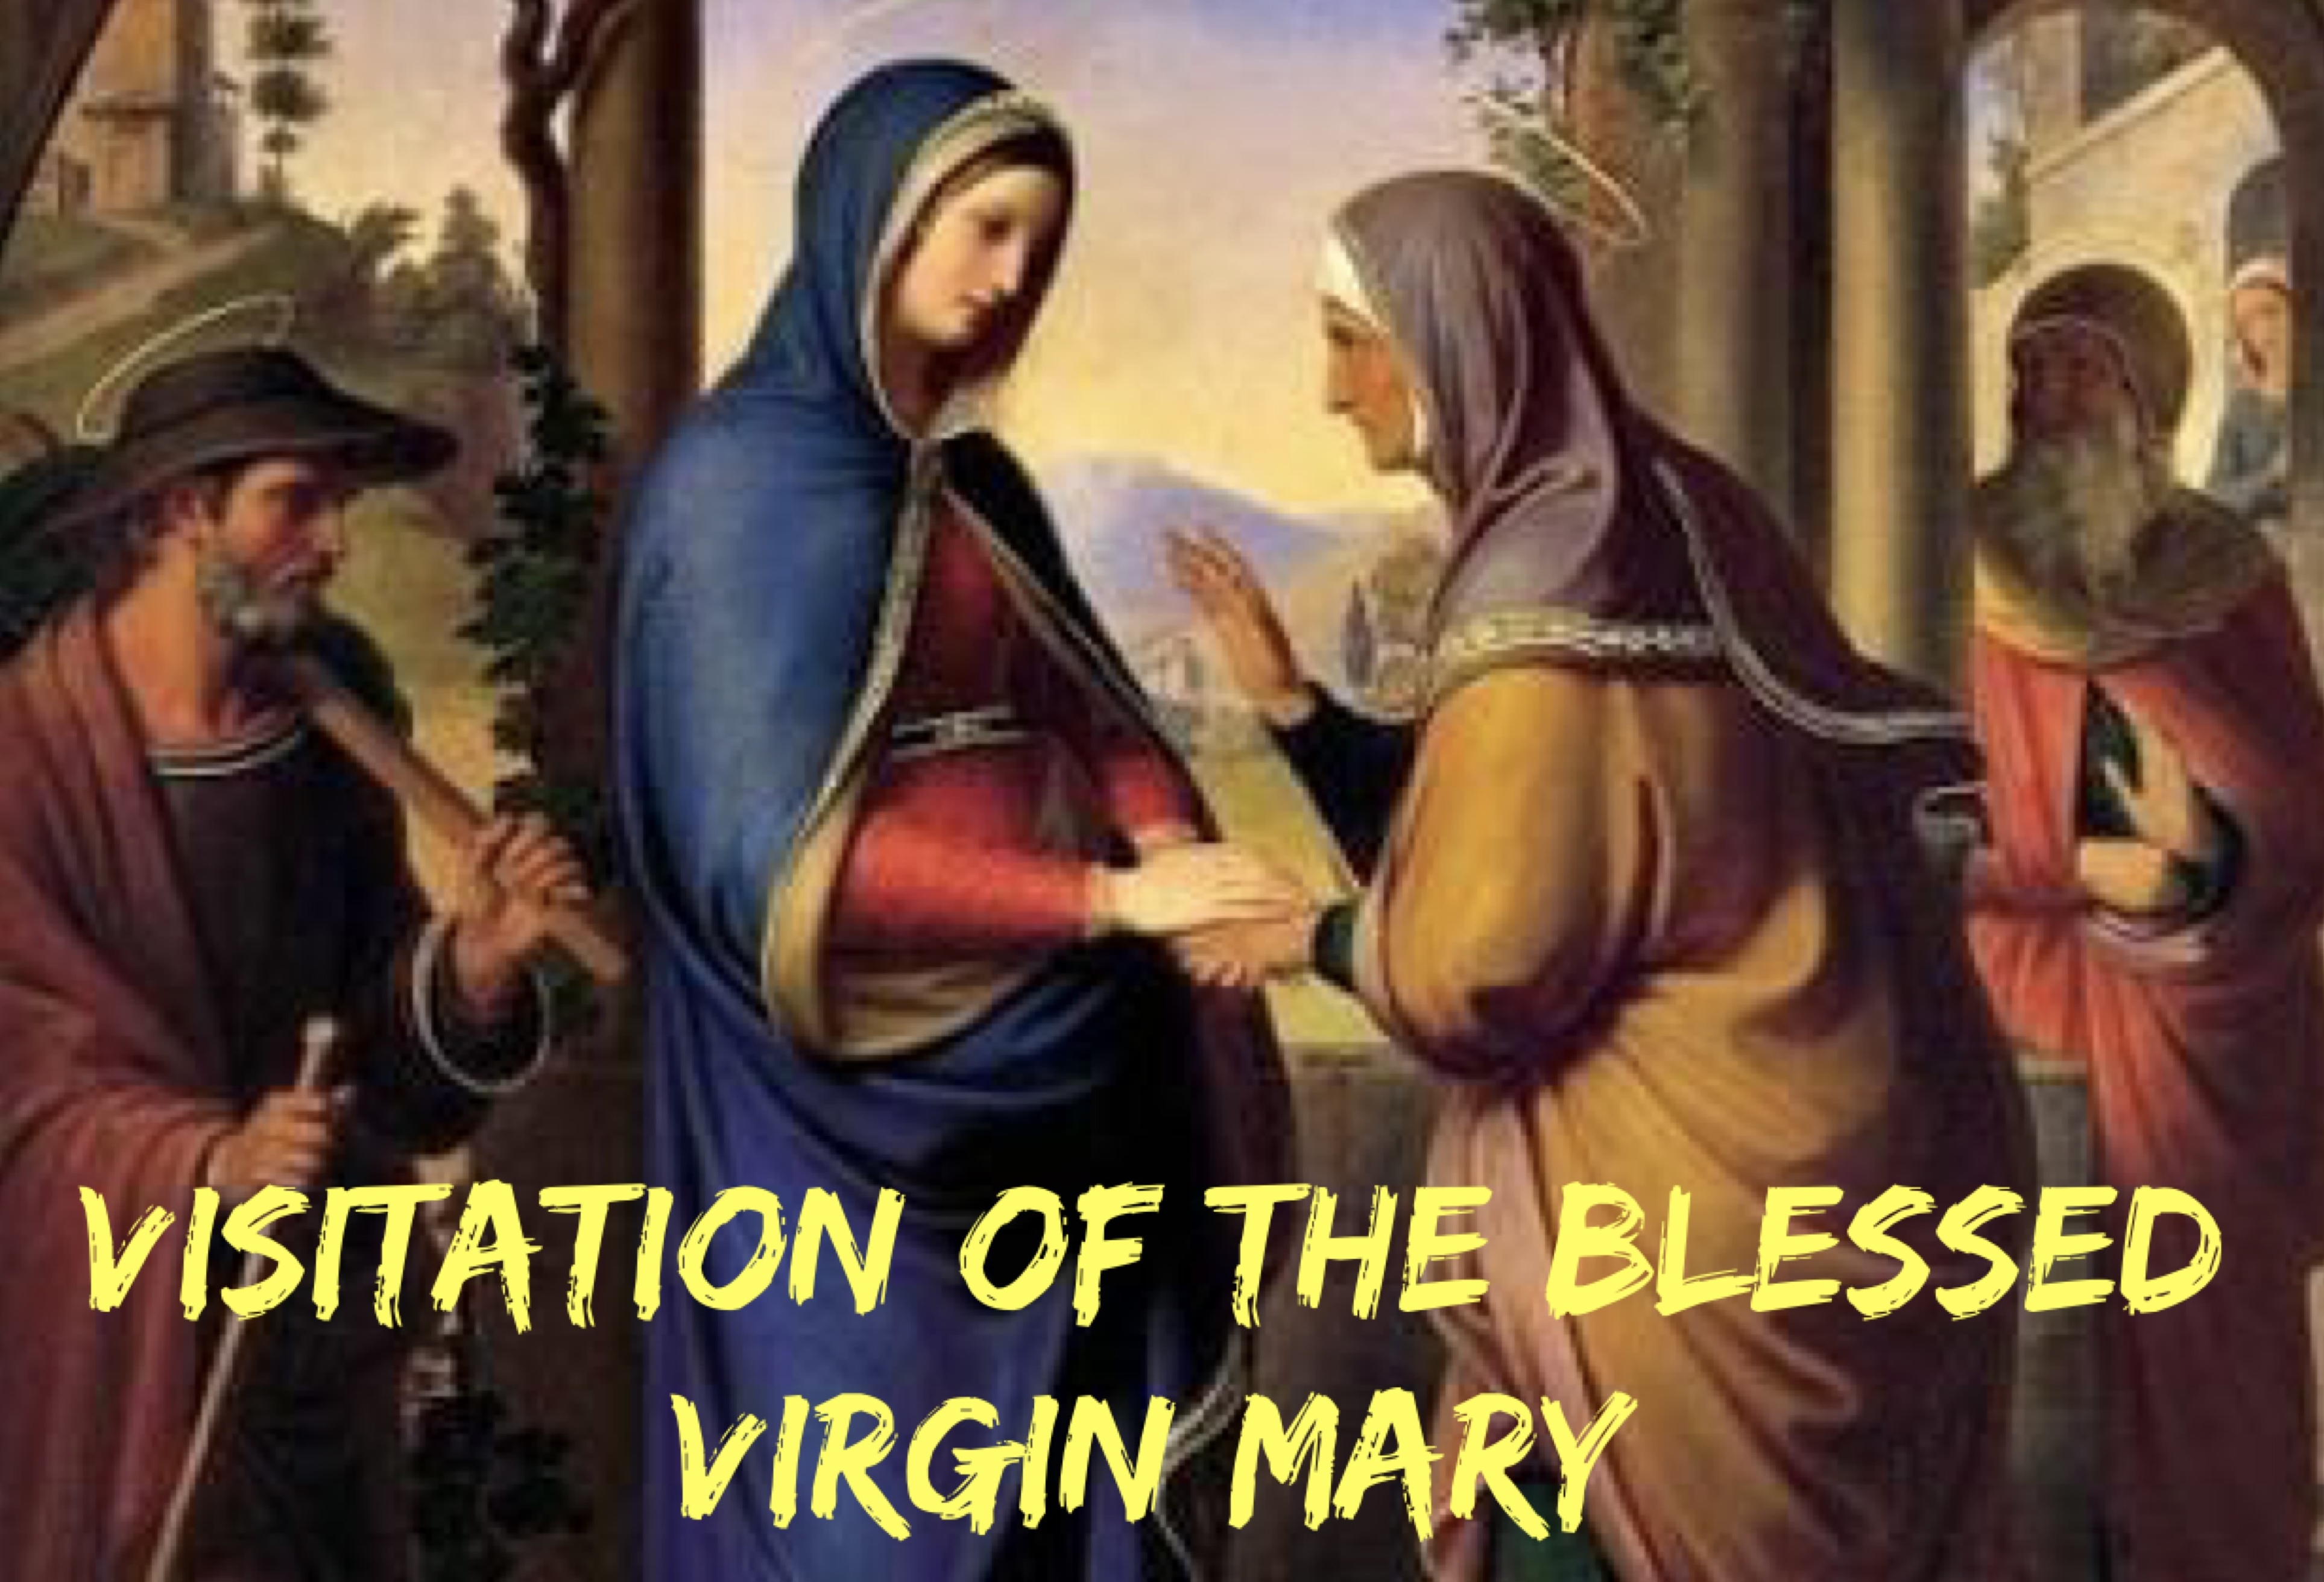 31st May - Visitation of the Blessed Virgin Mary